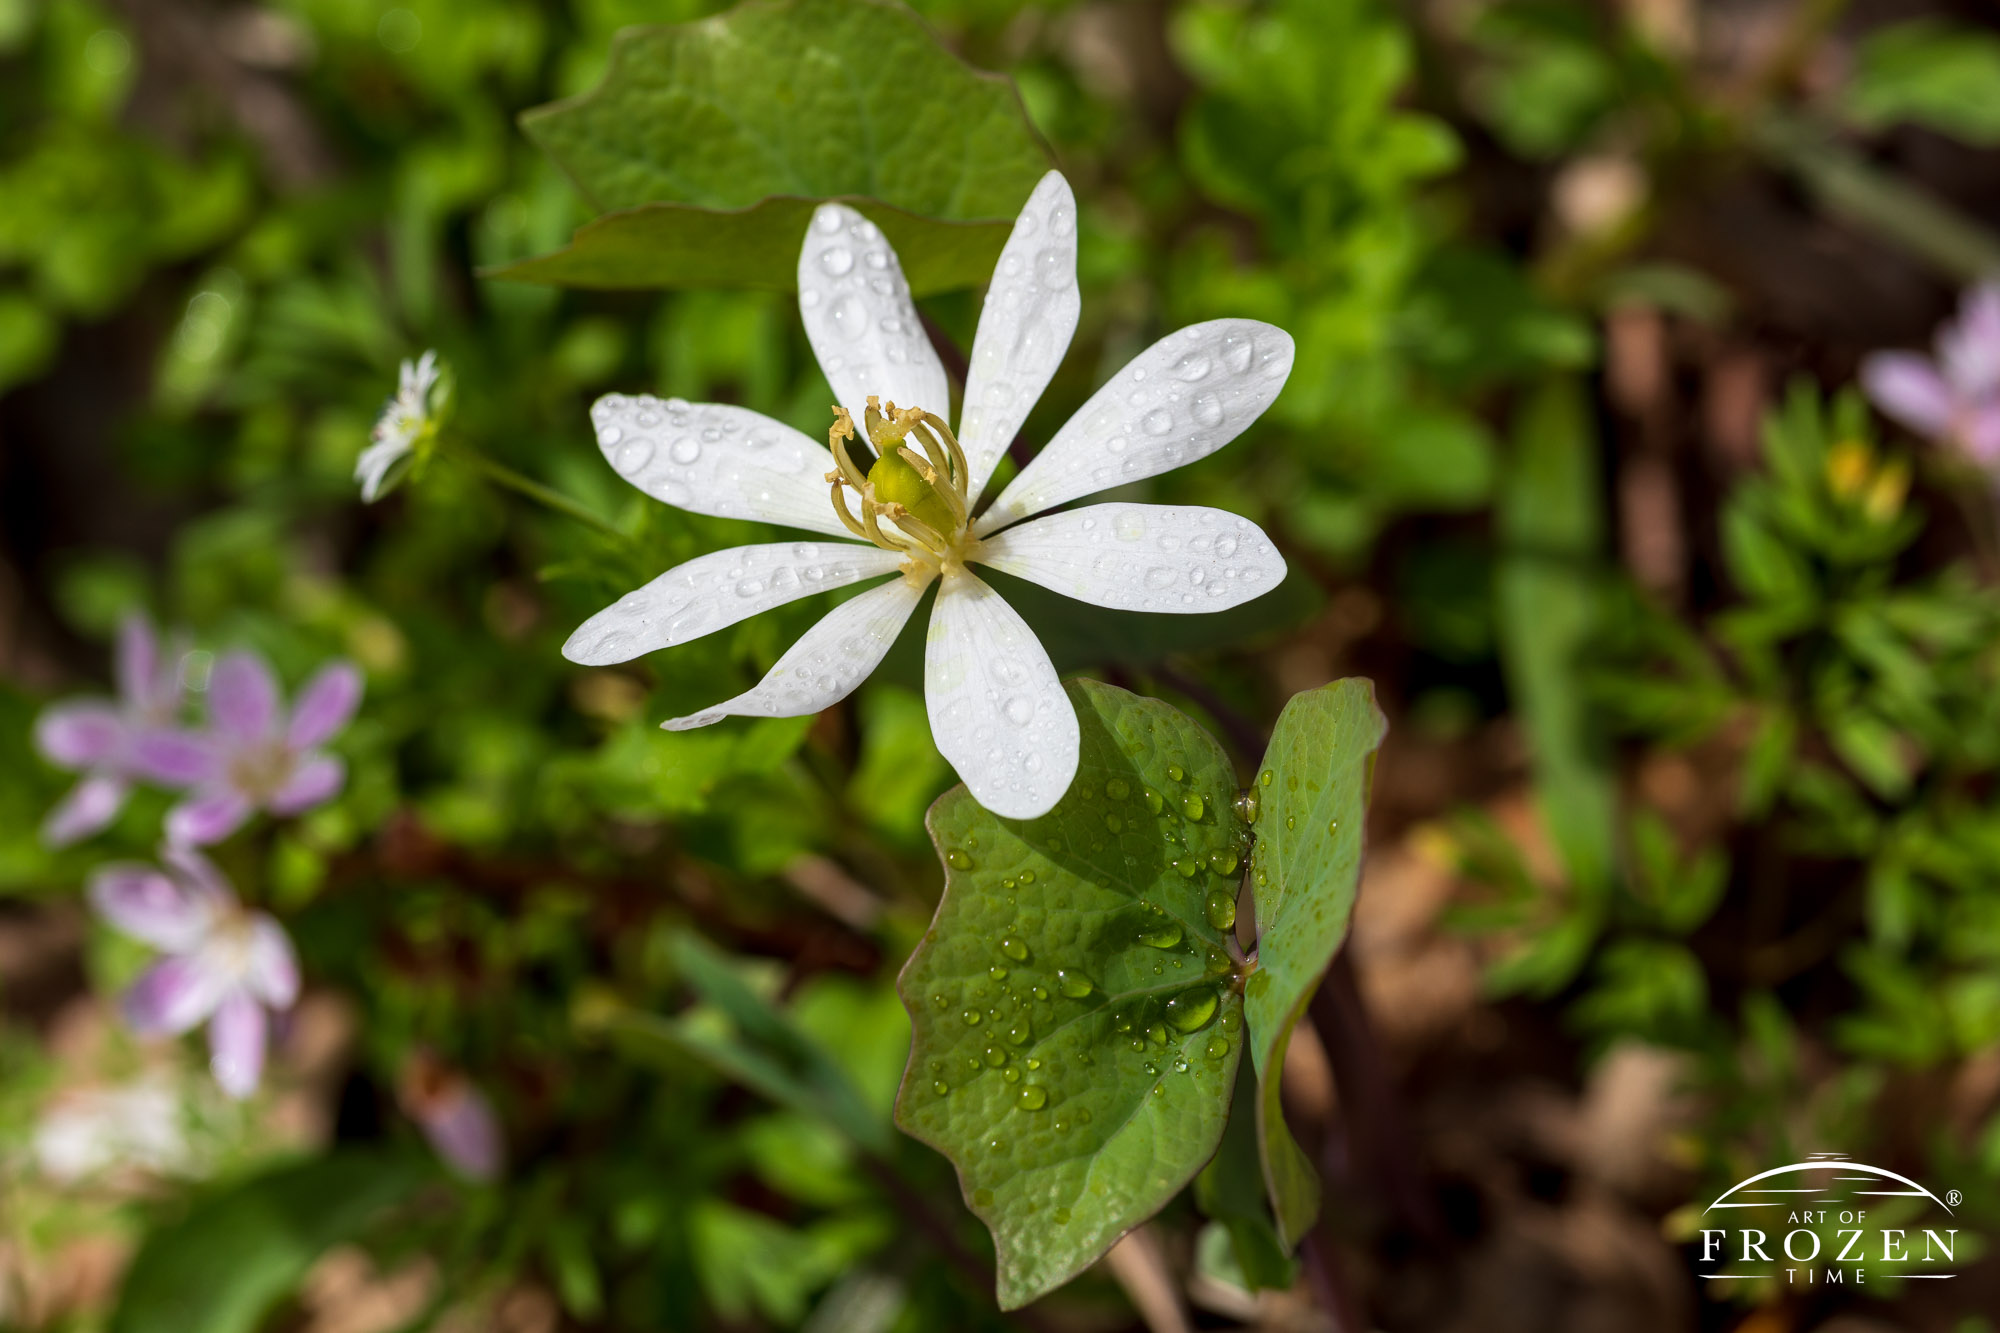 The Twinleaf is a frail perineal wildflower with eight white leaves and whose leaves take on the signature form of angel wings. This image shows the entire Twinleaf in full bloom which only occurs three days a year.